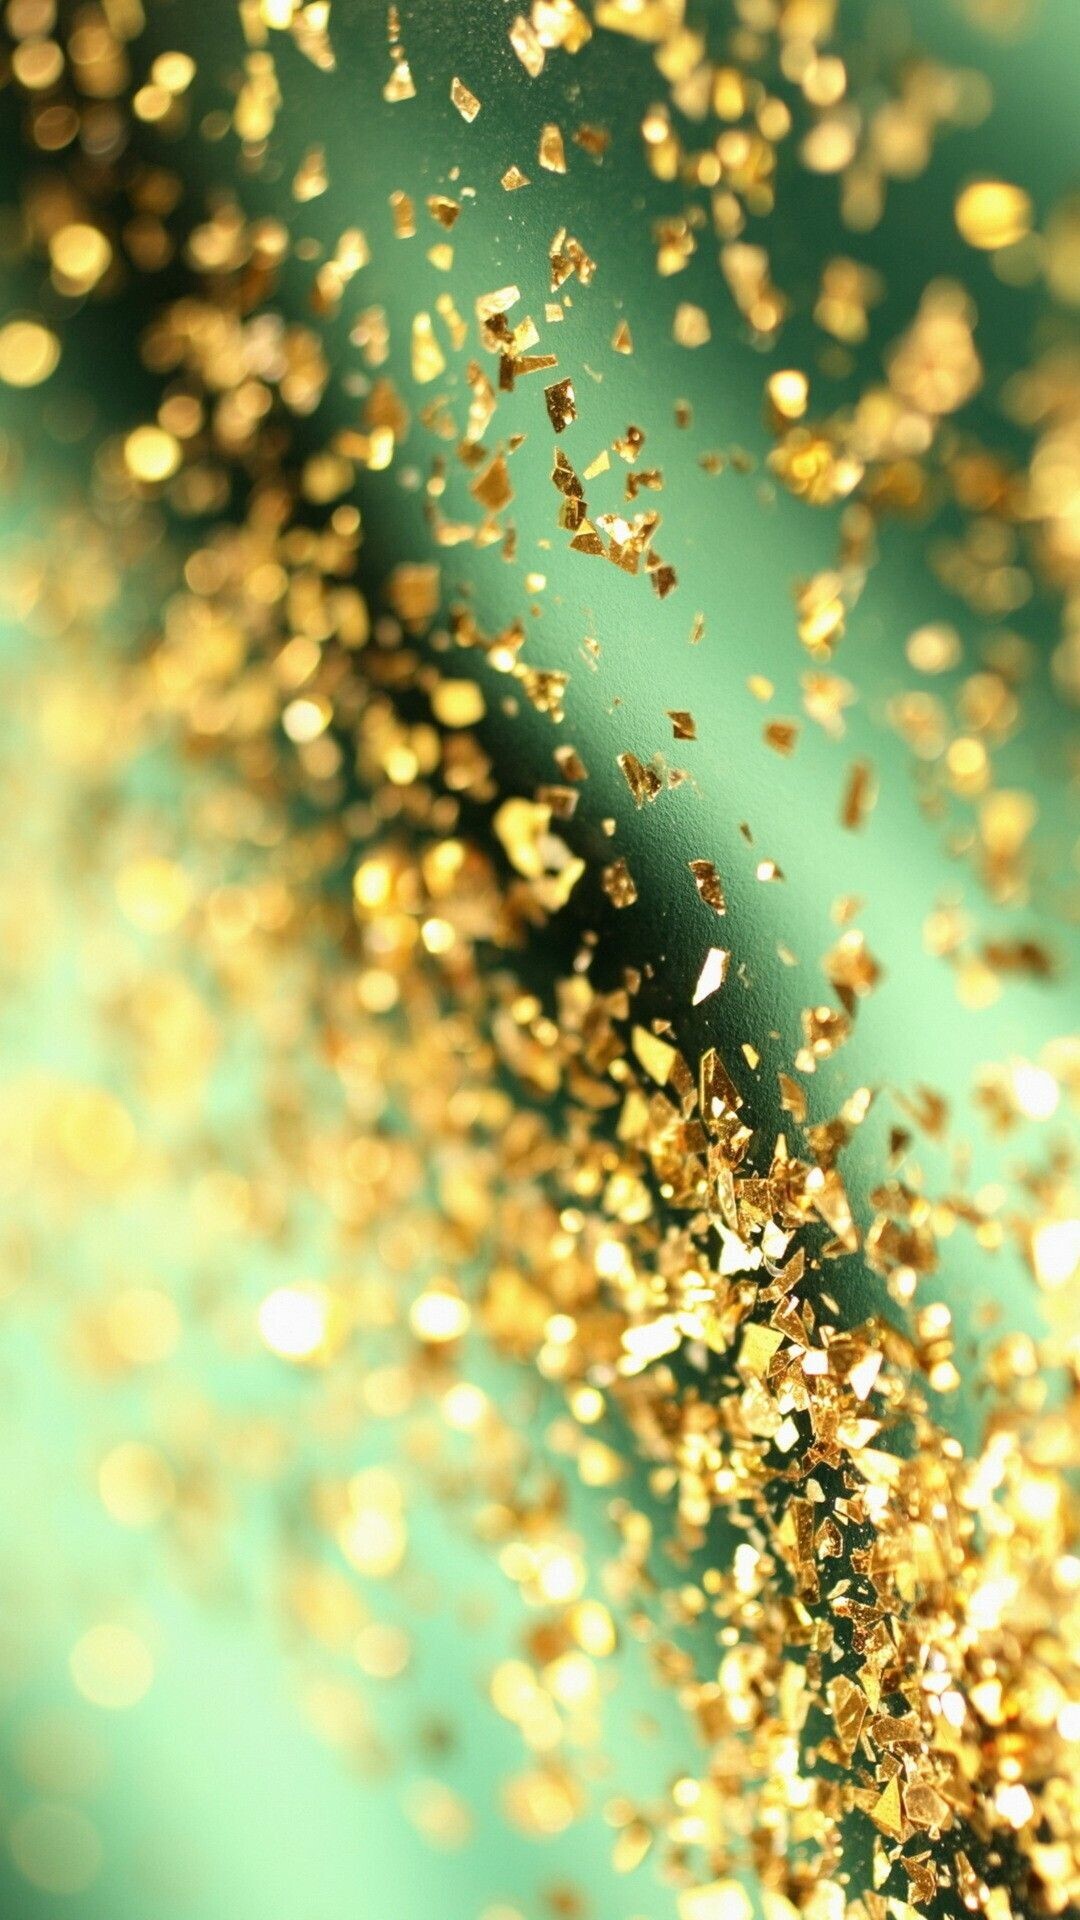 Gold Sparkle: Glitter used for decorative purposes, Gold reflective particles of various shapes. 1080x1920 Full HD Wallpaper.